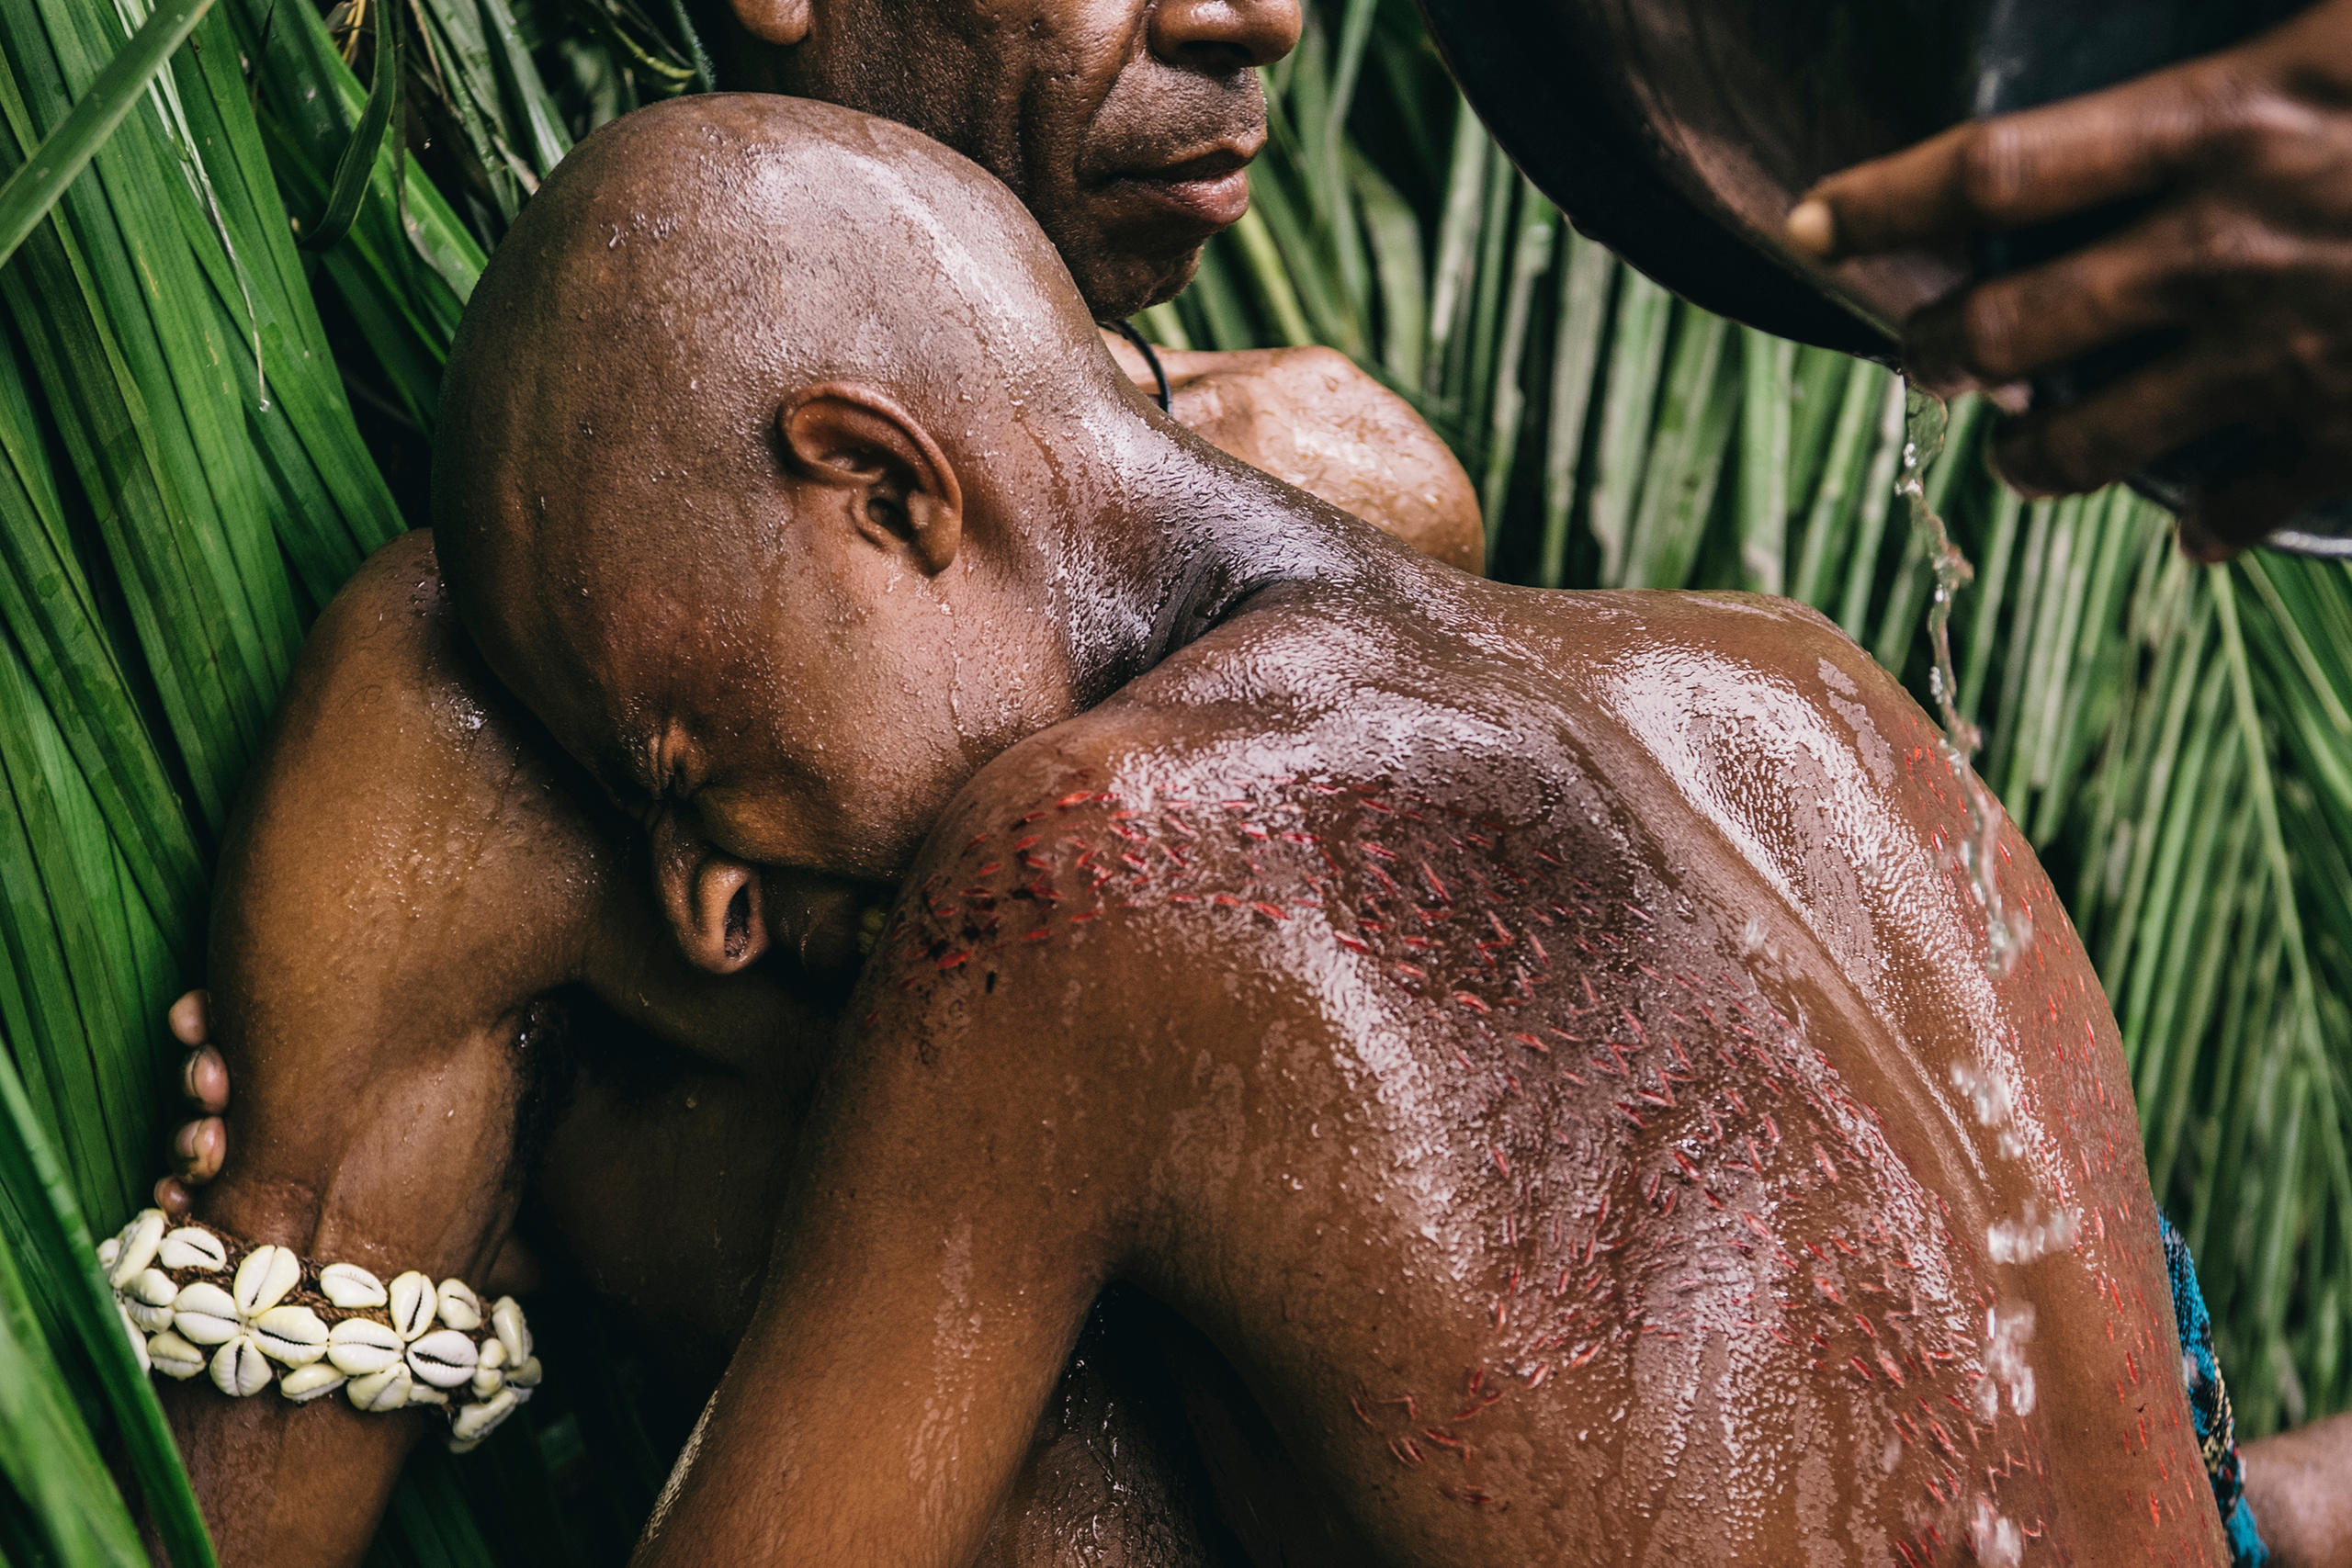 A man is being washed during a crocodile ritual in Papua New Guinea